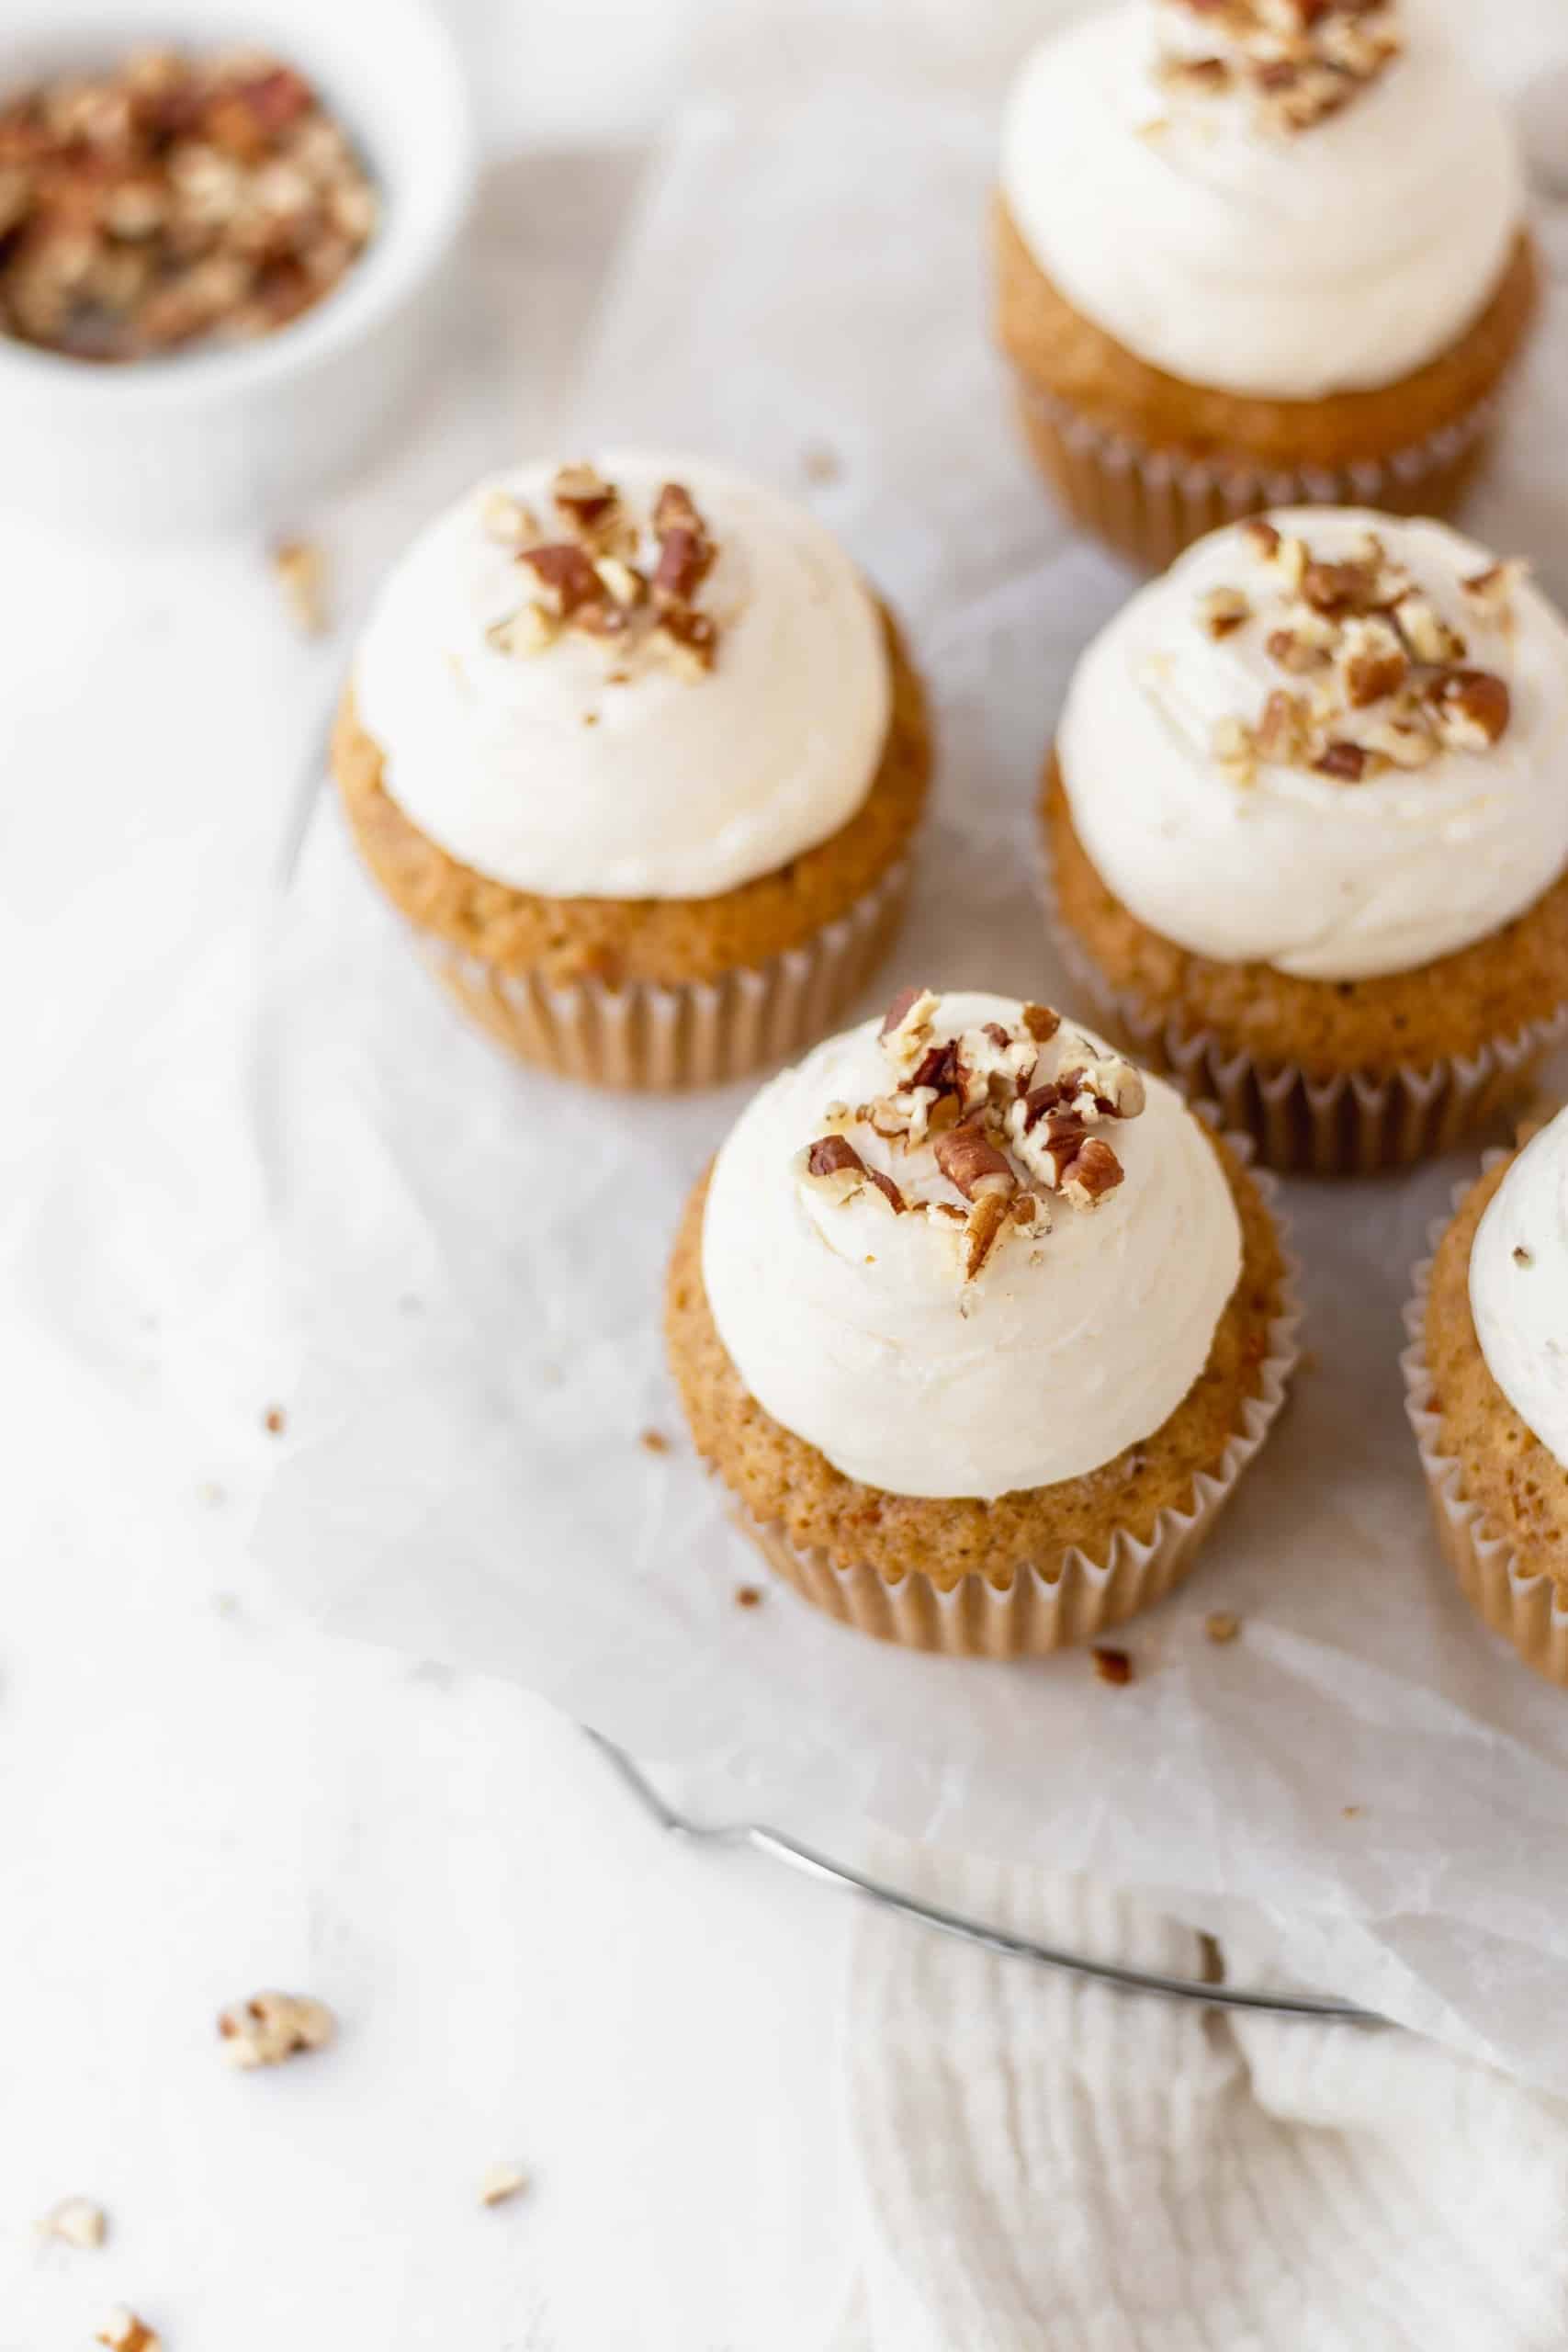 Cream cheese buttercream on carrot cupcakes with chopped pecans on top